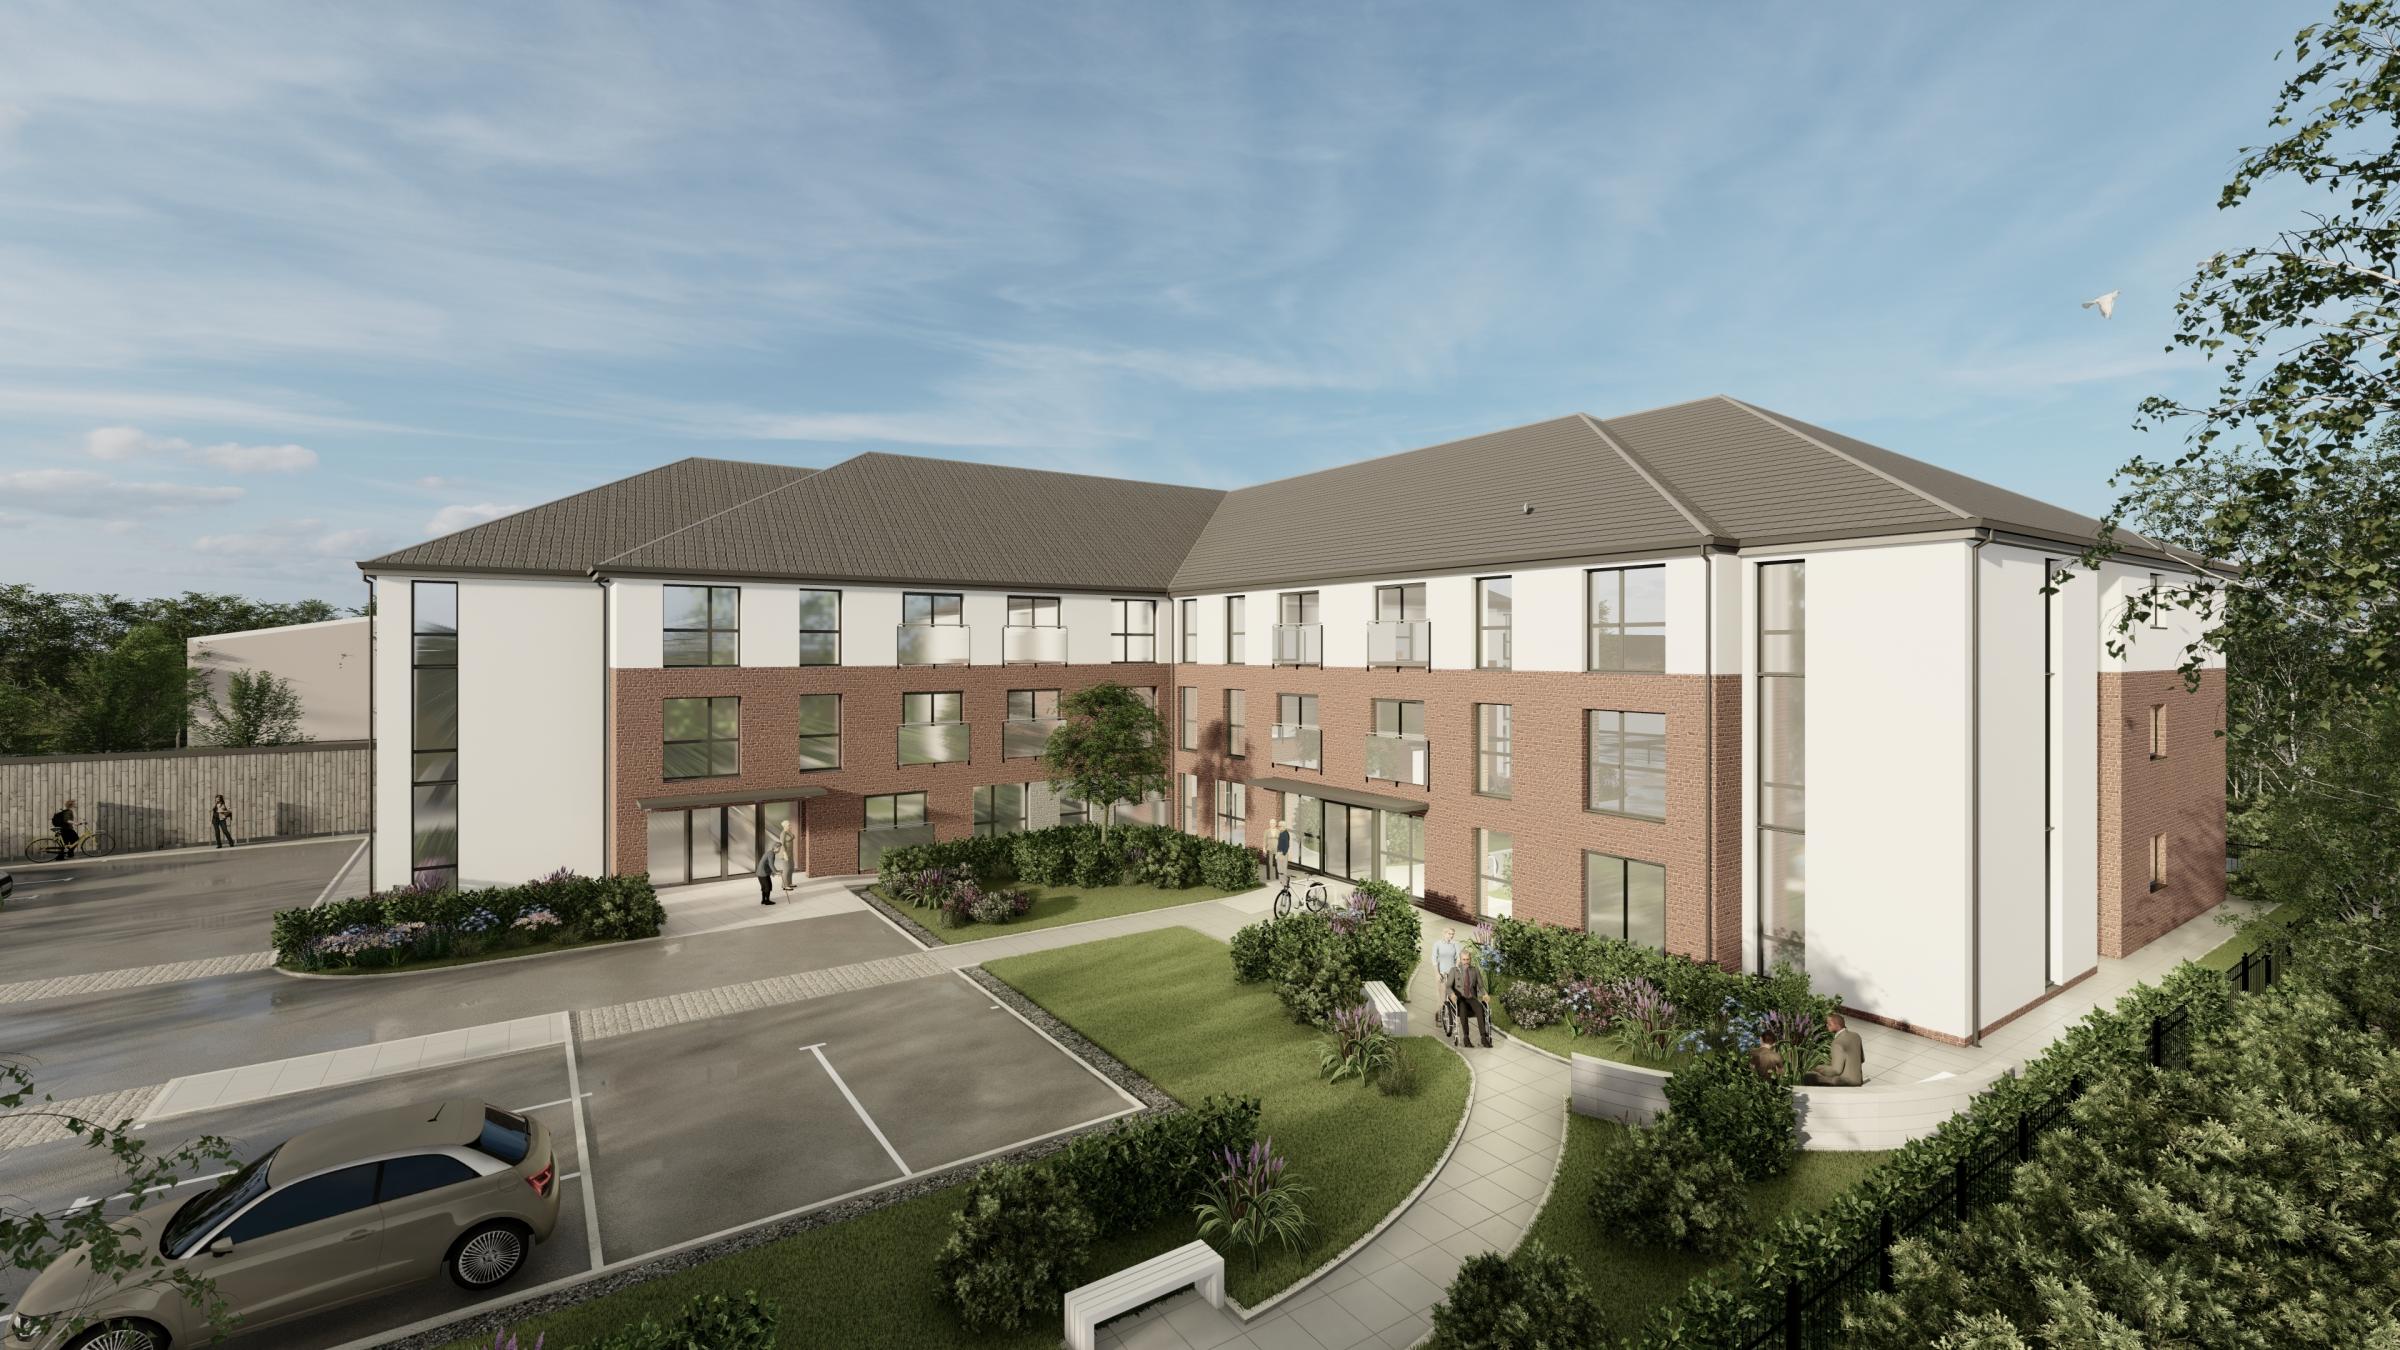 Artist impression of new retirement development at Bechers, Widnes, on site of old Upton Medical Centre. Photo credit Baldwin Design Consultancy Ltd.